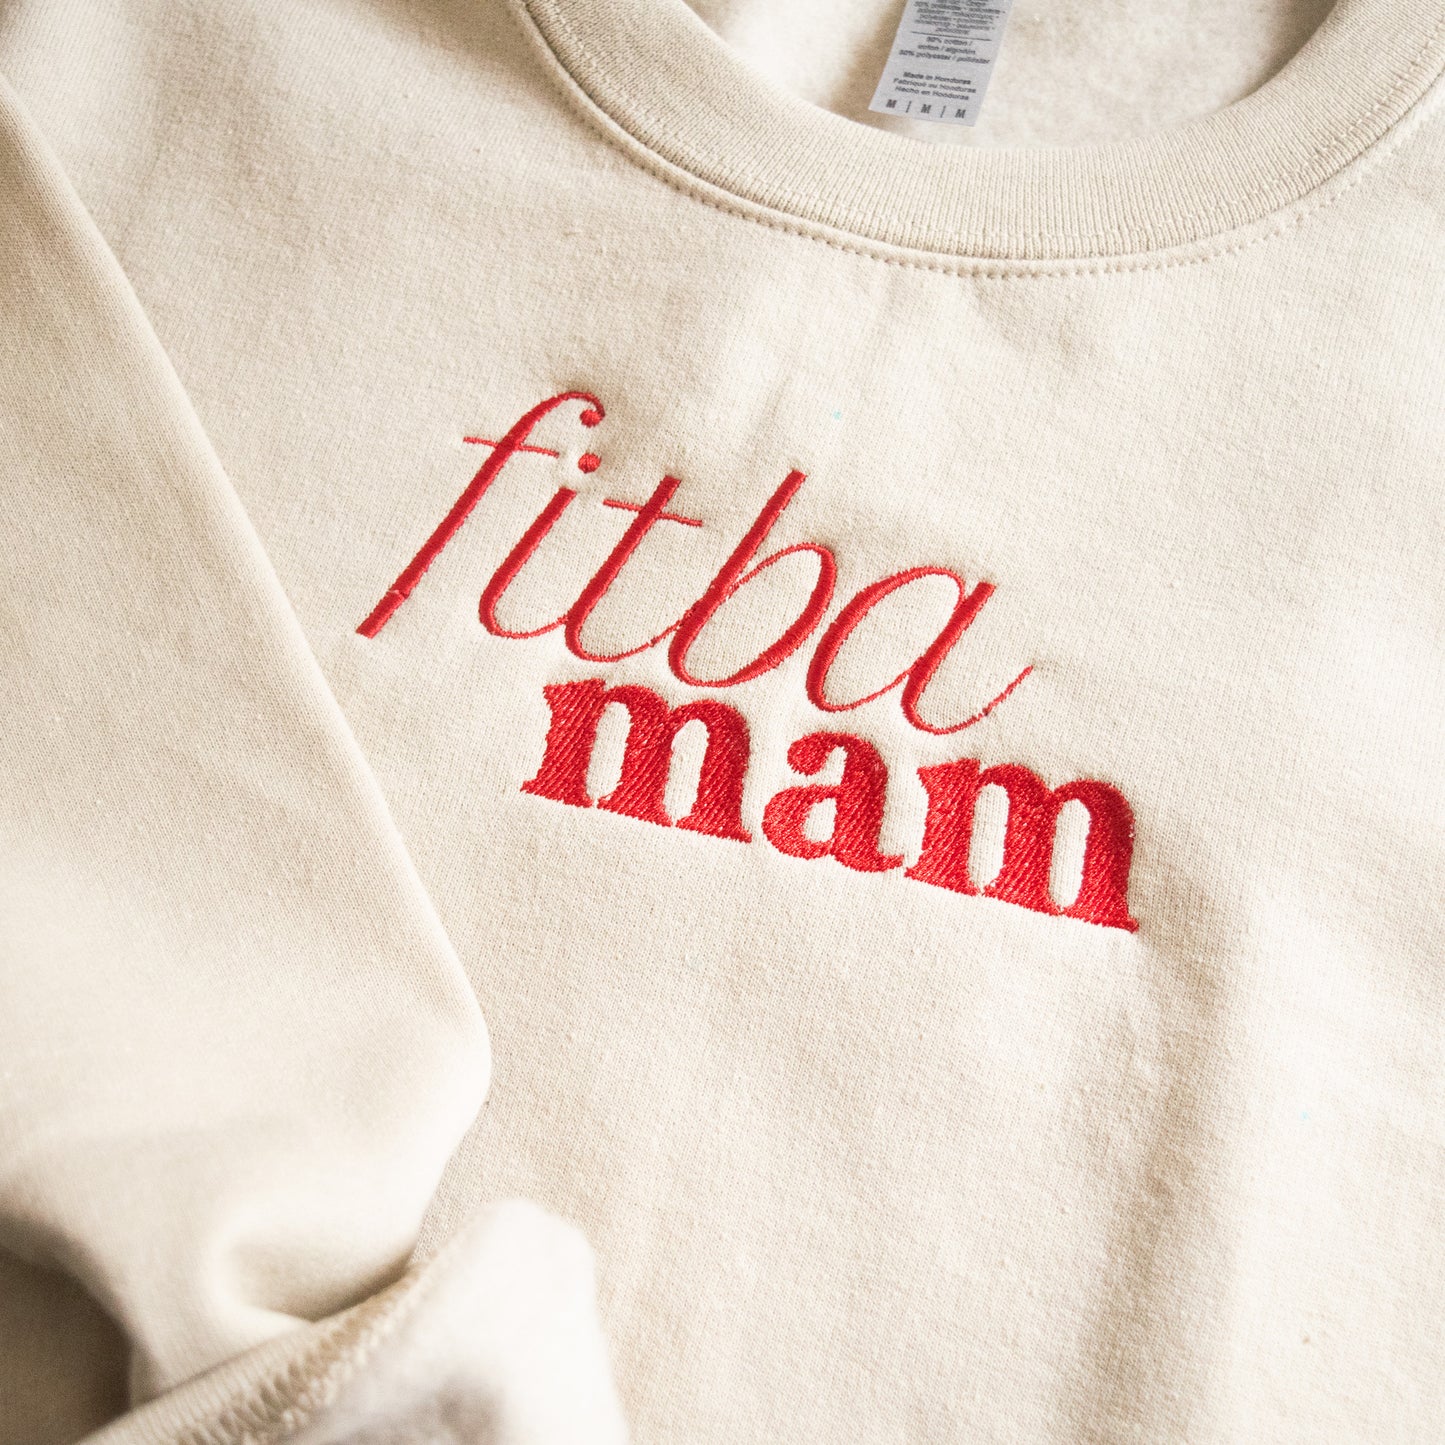 ⚽️📣 Cosy Oversized Sports Mum Sweater with Custom Embroidery - Cheer for Your Team in Style! 🎉🙌"